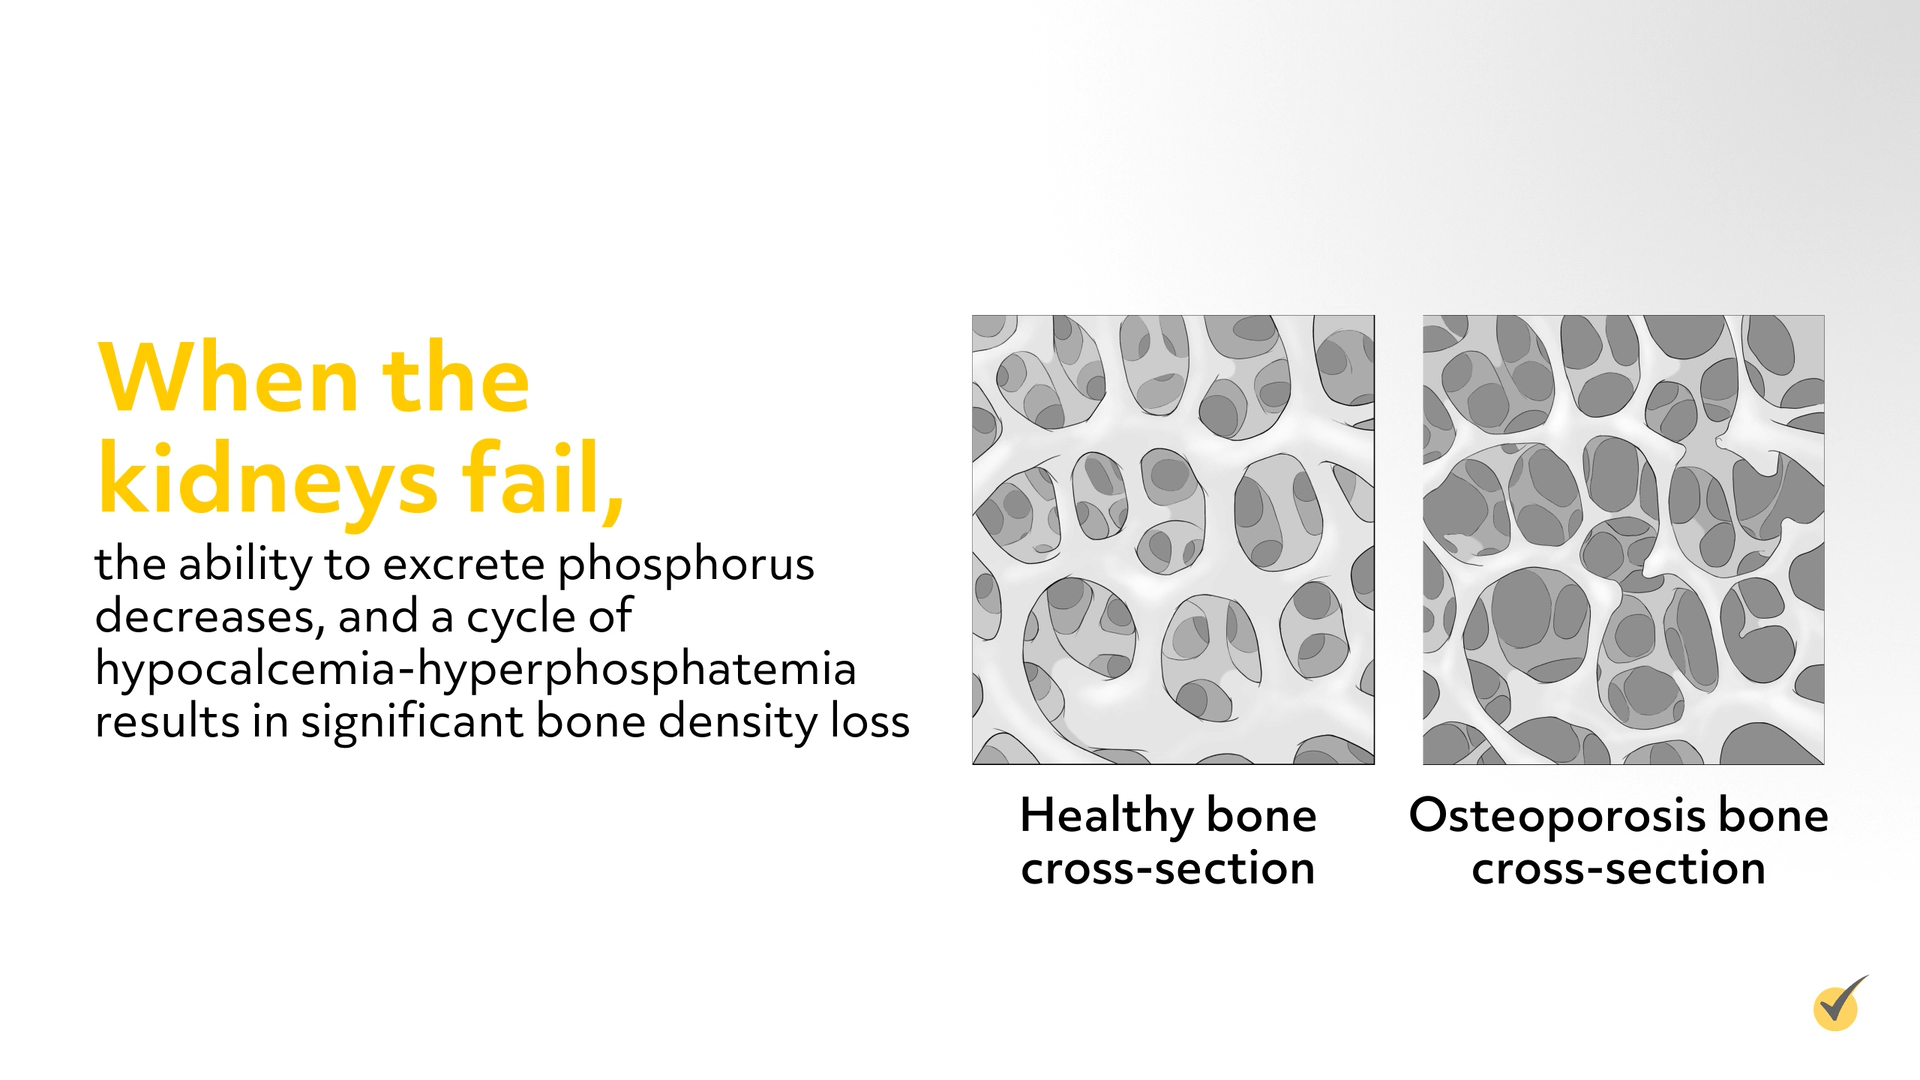 Example of bone density loss. There is a healthy bone cross-section, and a osteoporosis bone cross-section. While the healthy bone has a thick structure, the osteoporosis bone is deteriorated and weak. 